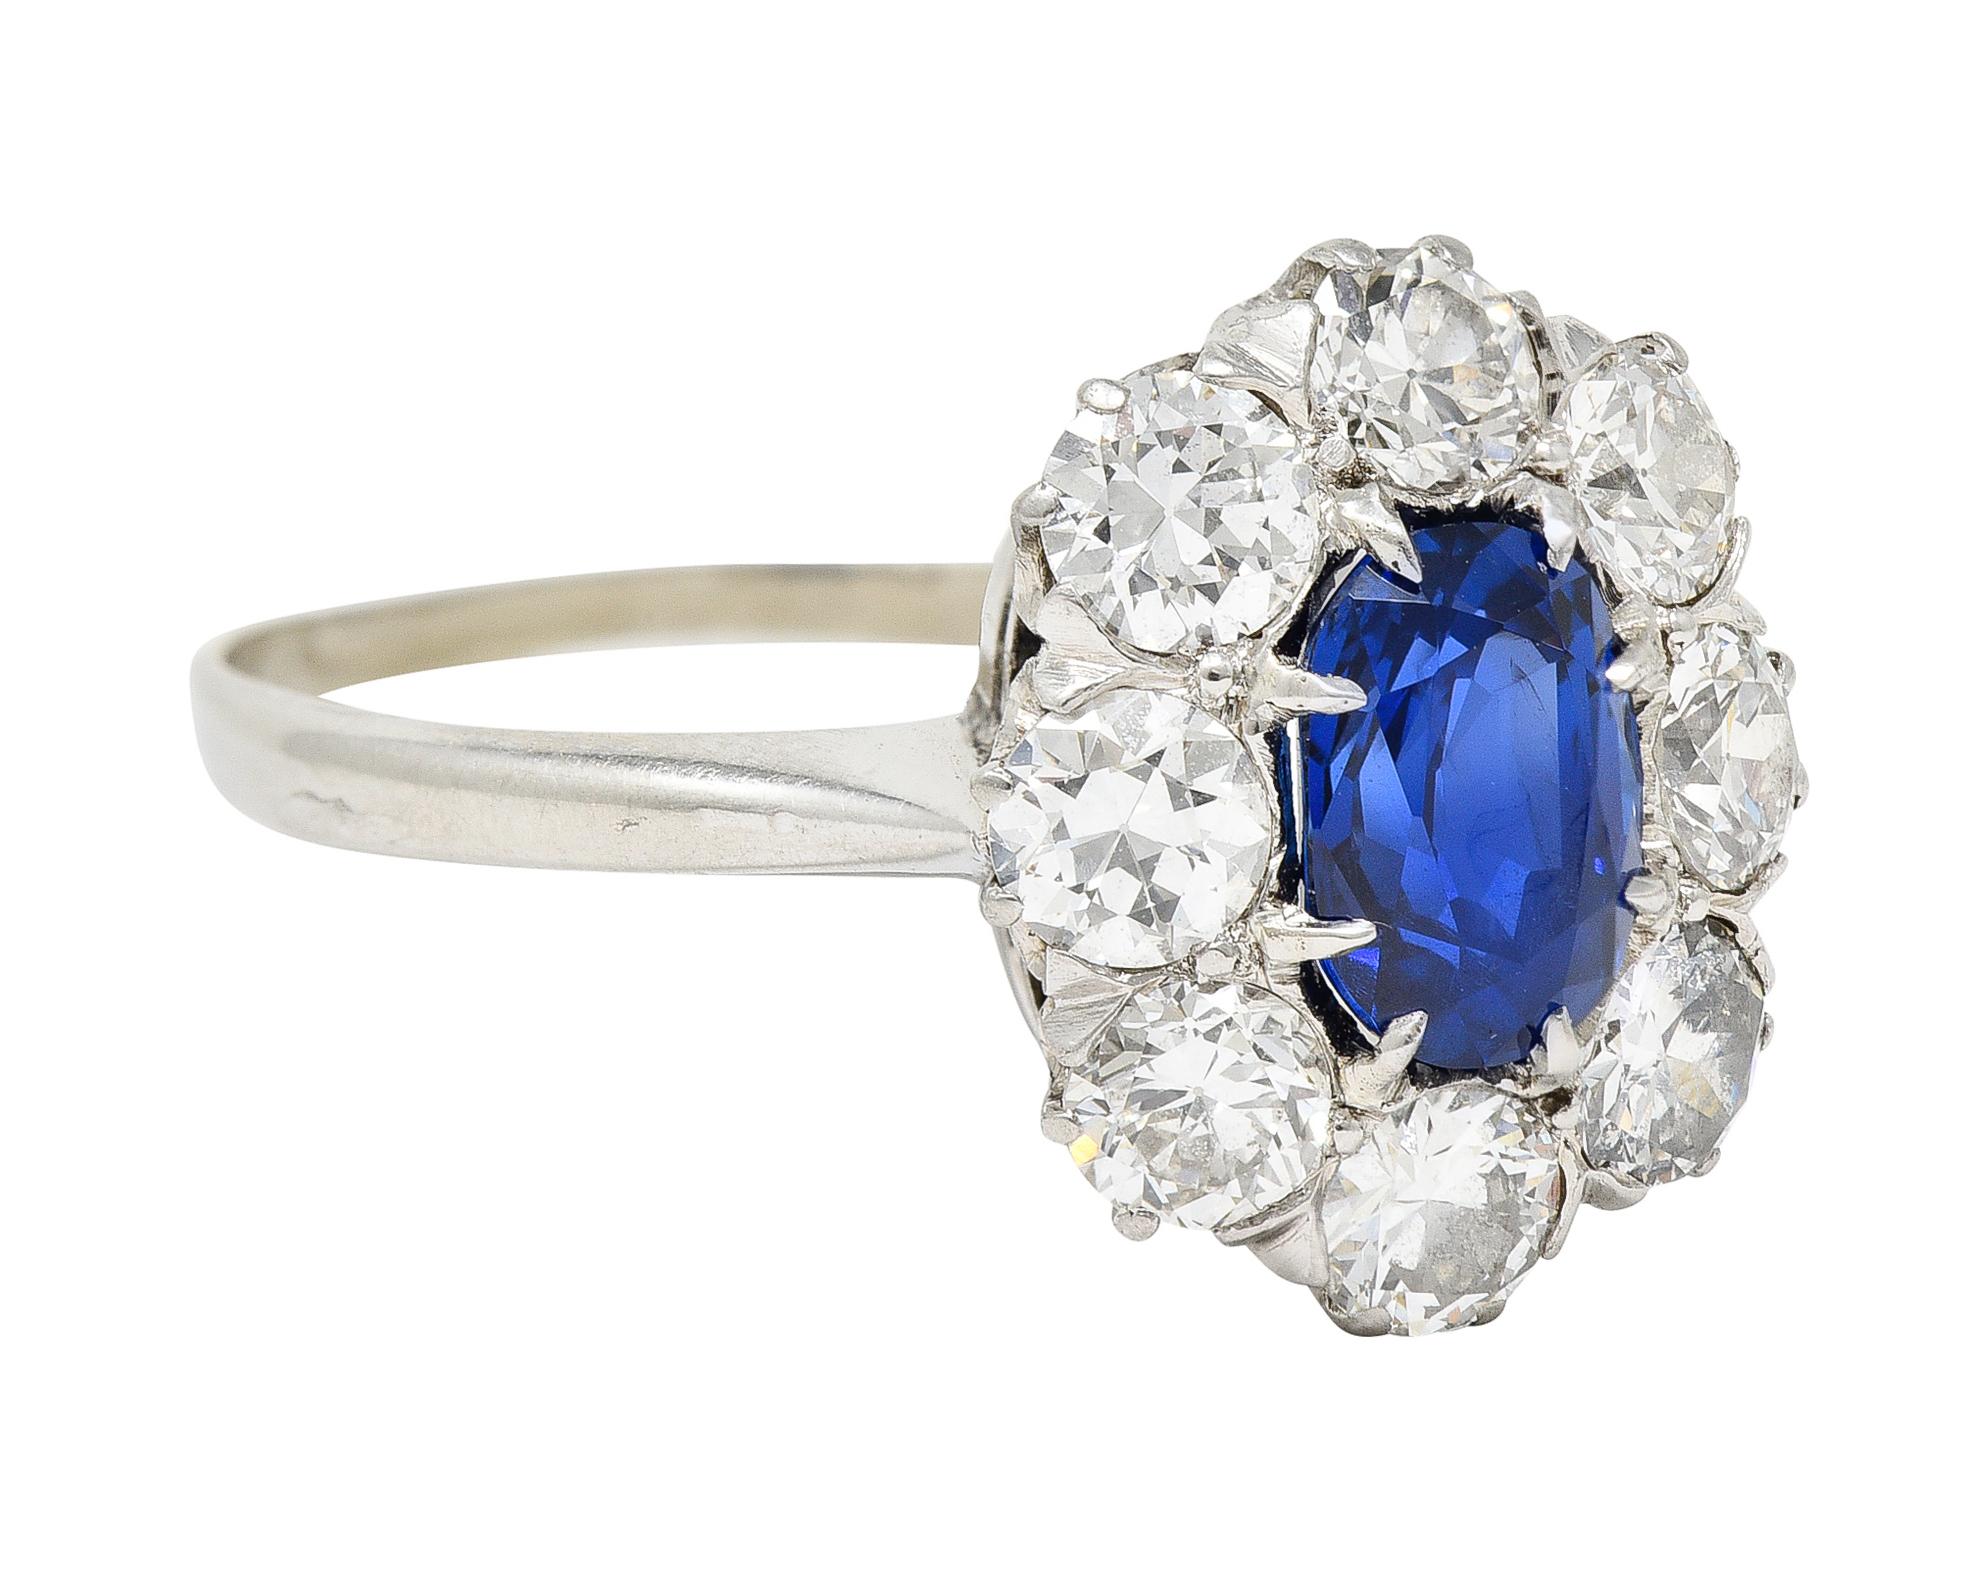 Centering an oval cut sapphire weighing 1.20 carats - transparent deep blue. Natural Burmese in origin with no indications of heat treatment. Set with talon prongs with a halo surround of old European cut diamonds. Weighing approximately 1.28 carats